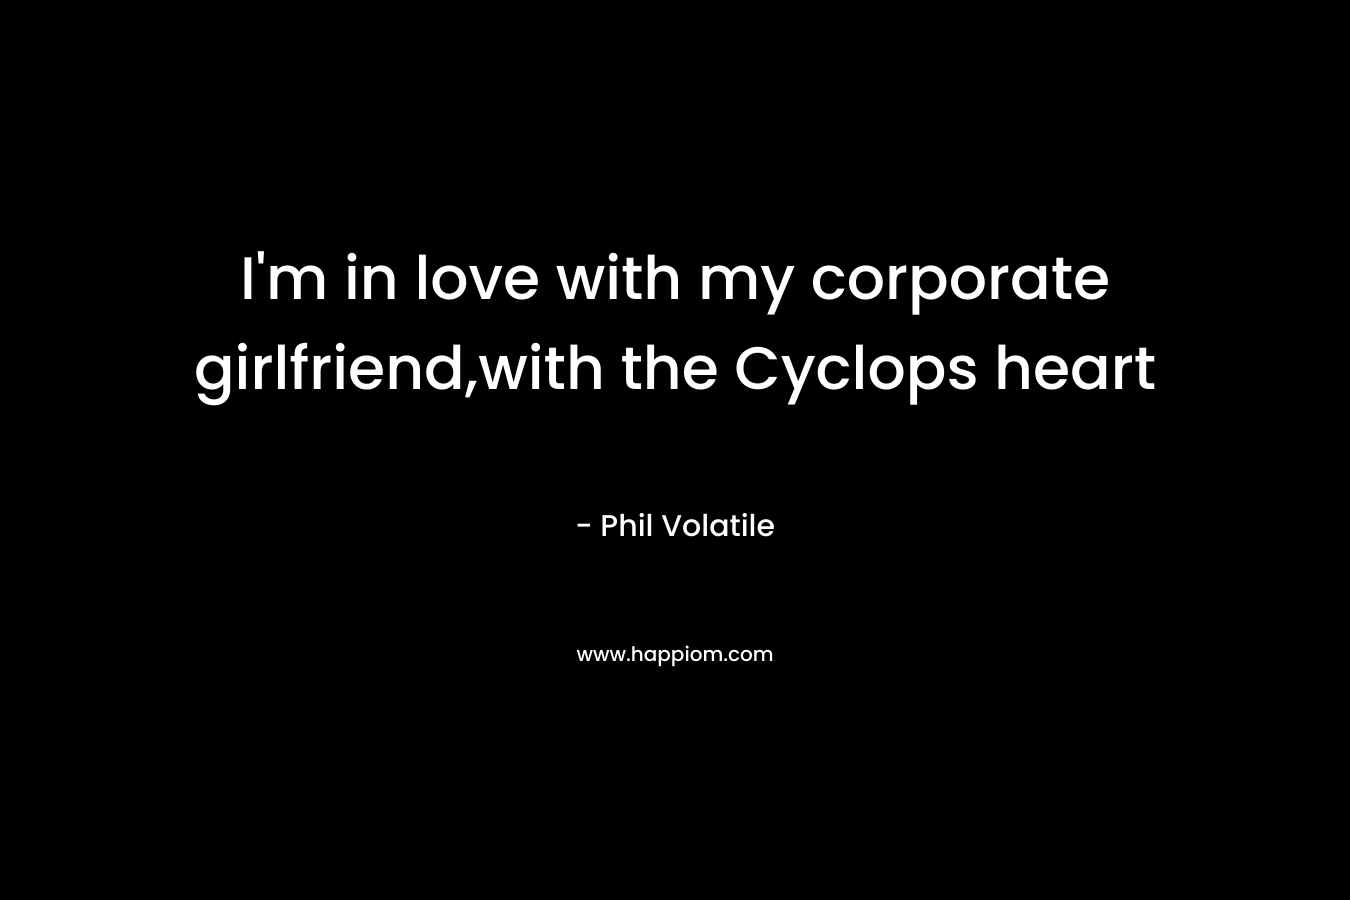 I’m in love with my corporate girlfriend,with the Cyclops heart – Phil Volatile